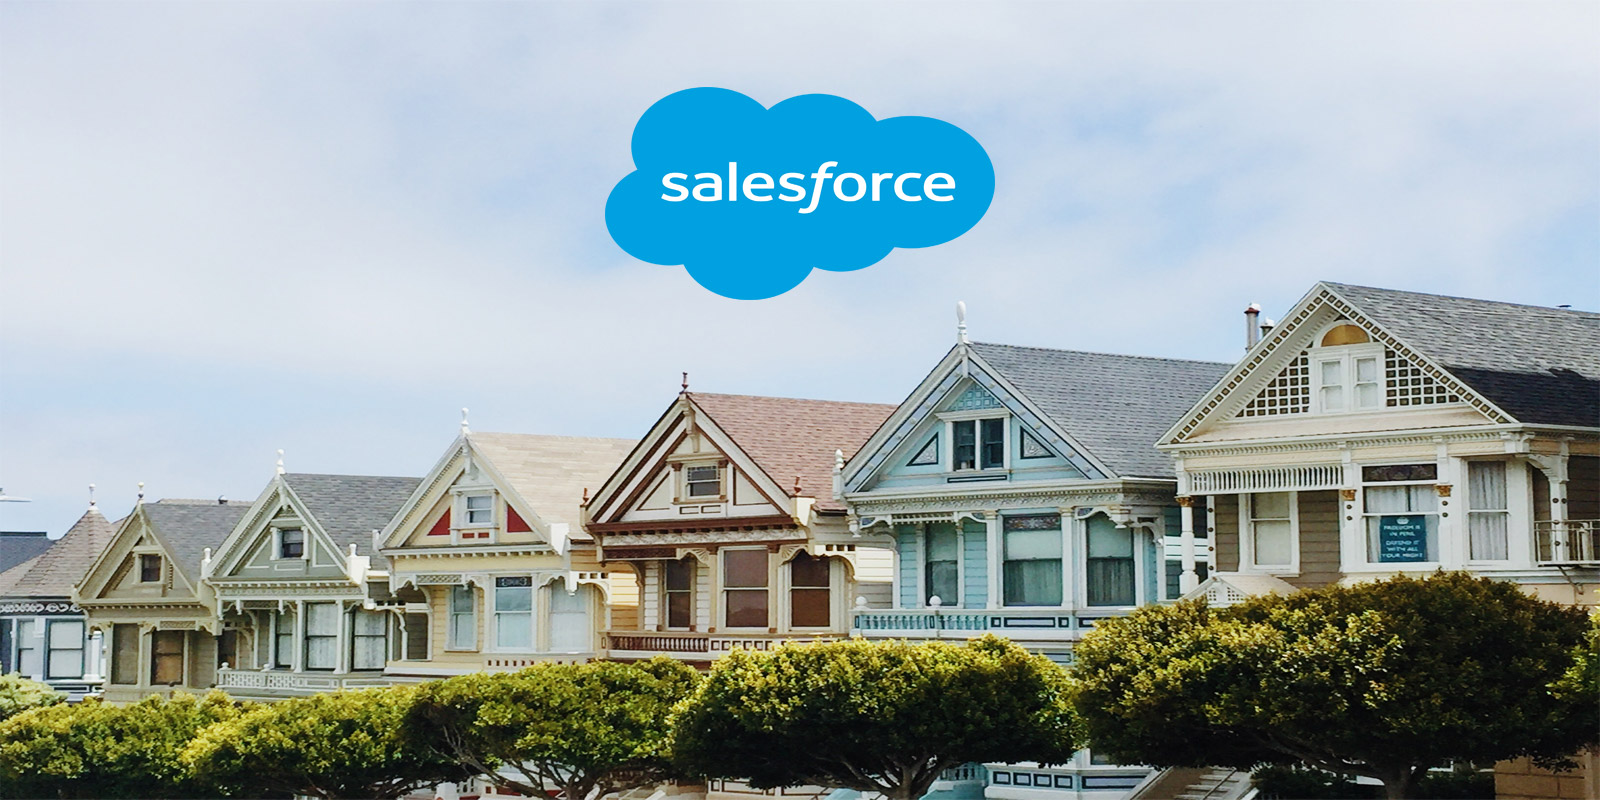 Salesforce for Real Estate Industry